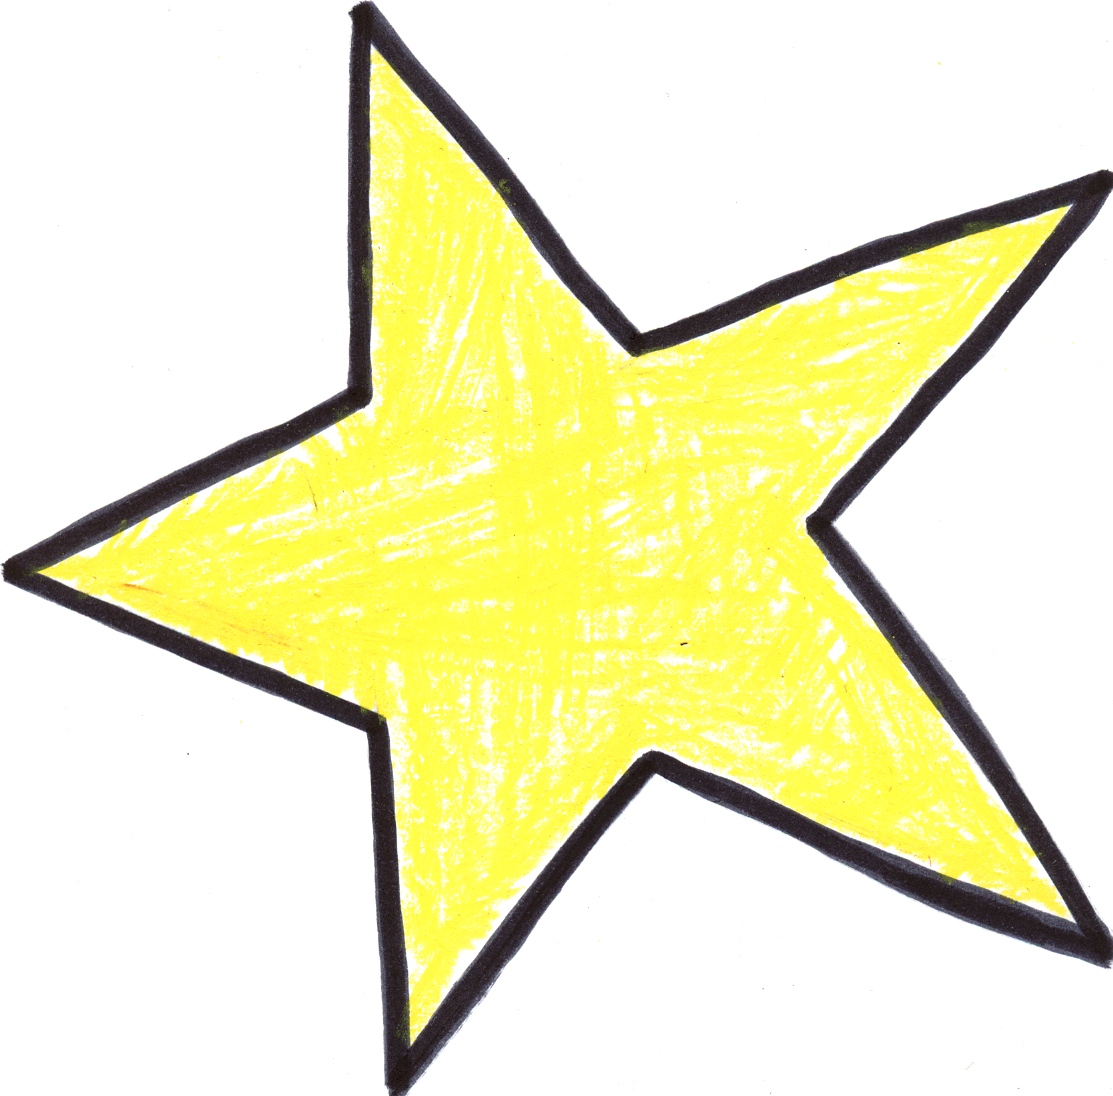 Star Clip Art Printable - Free Clipart Images